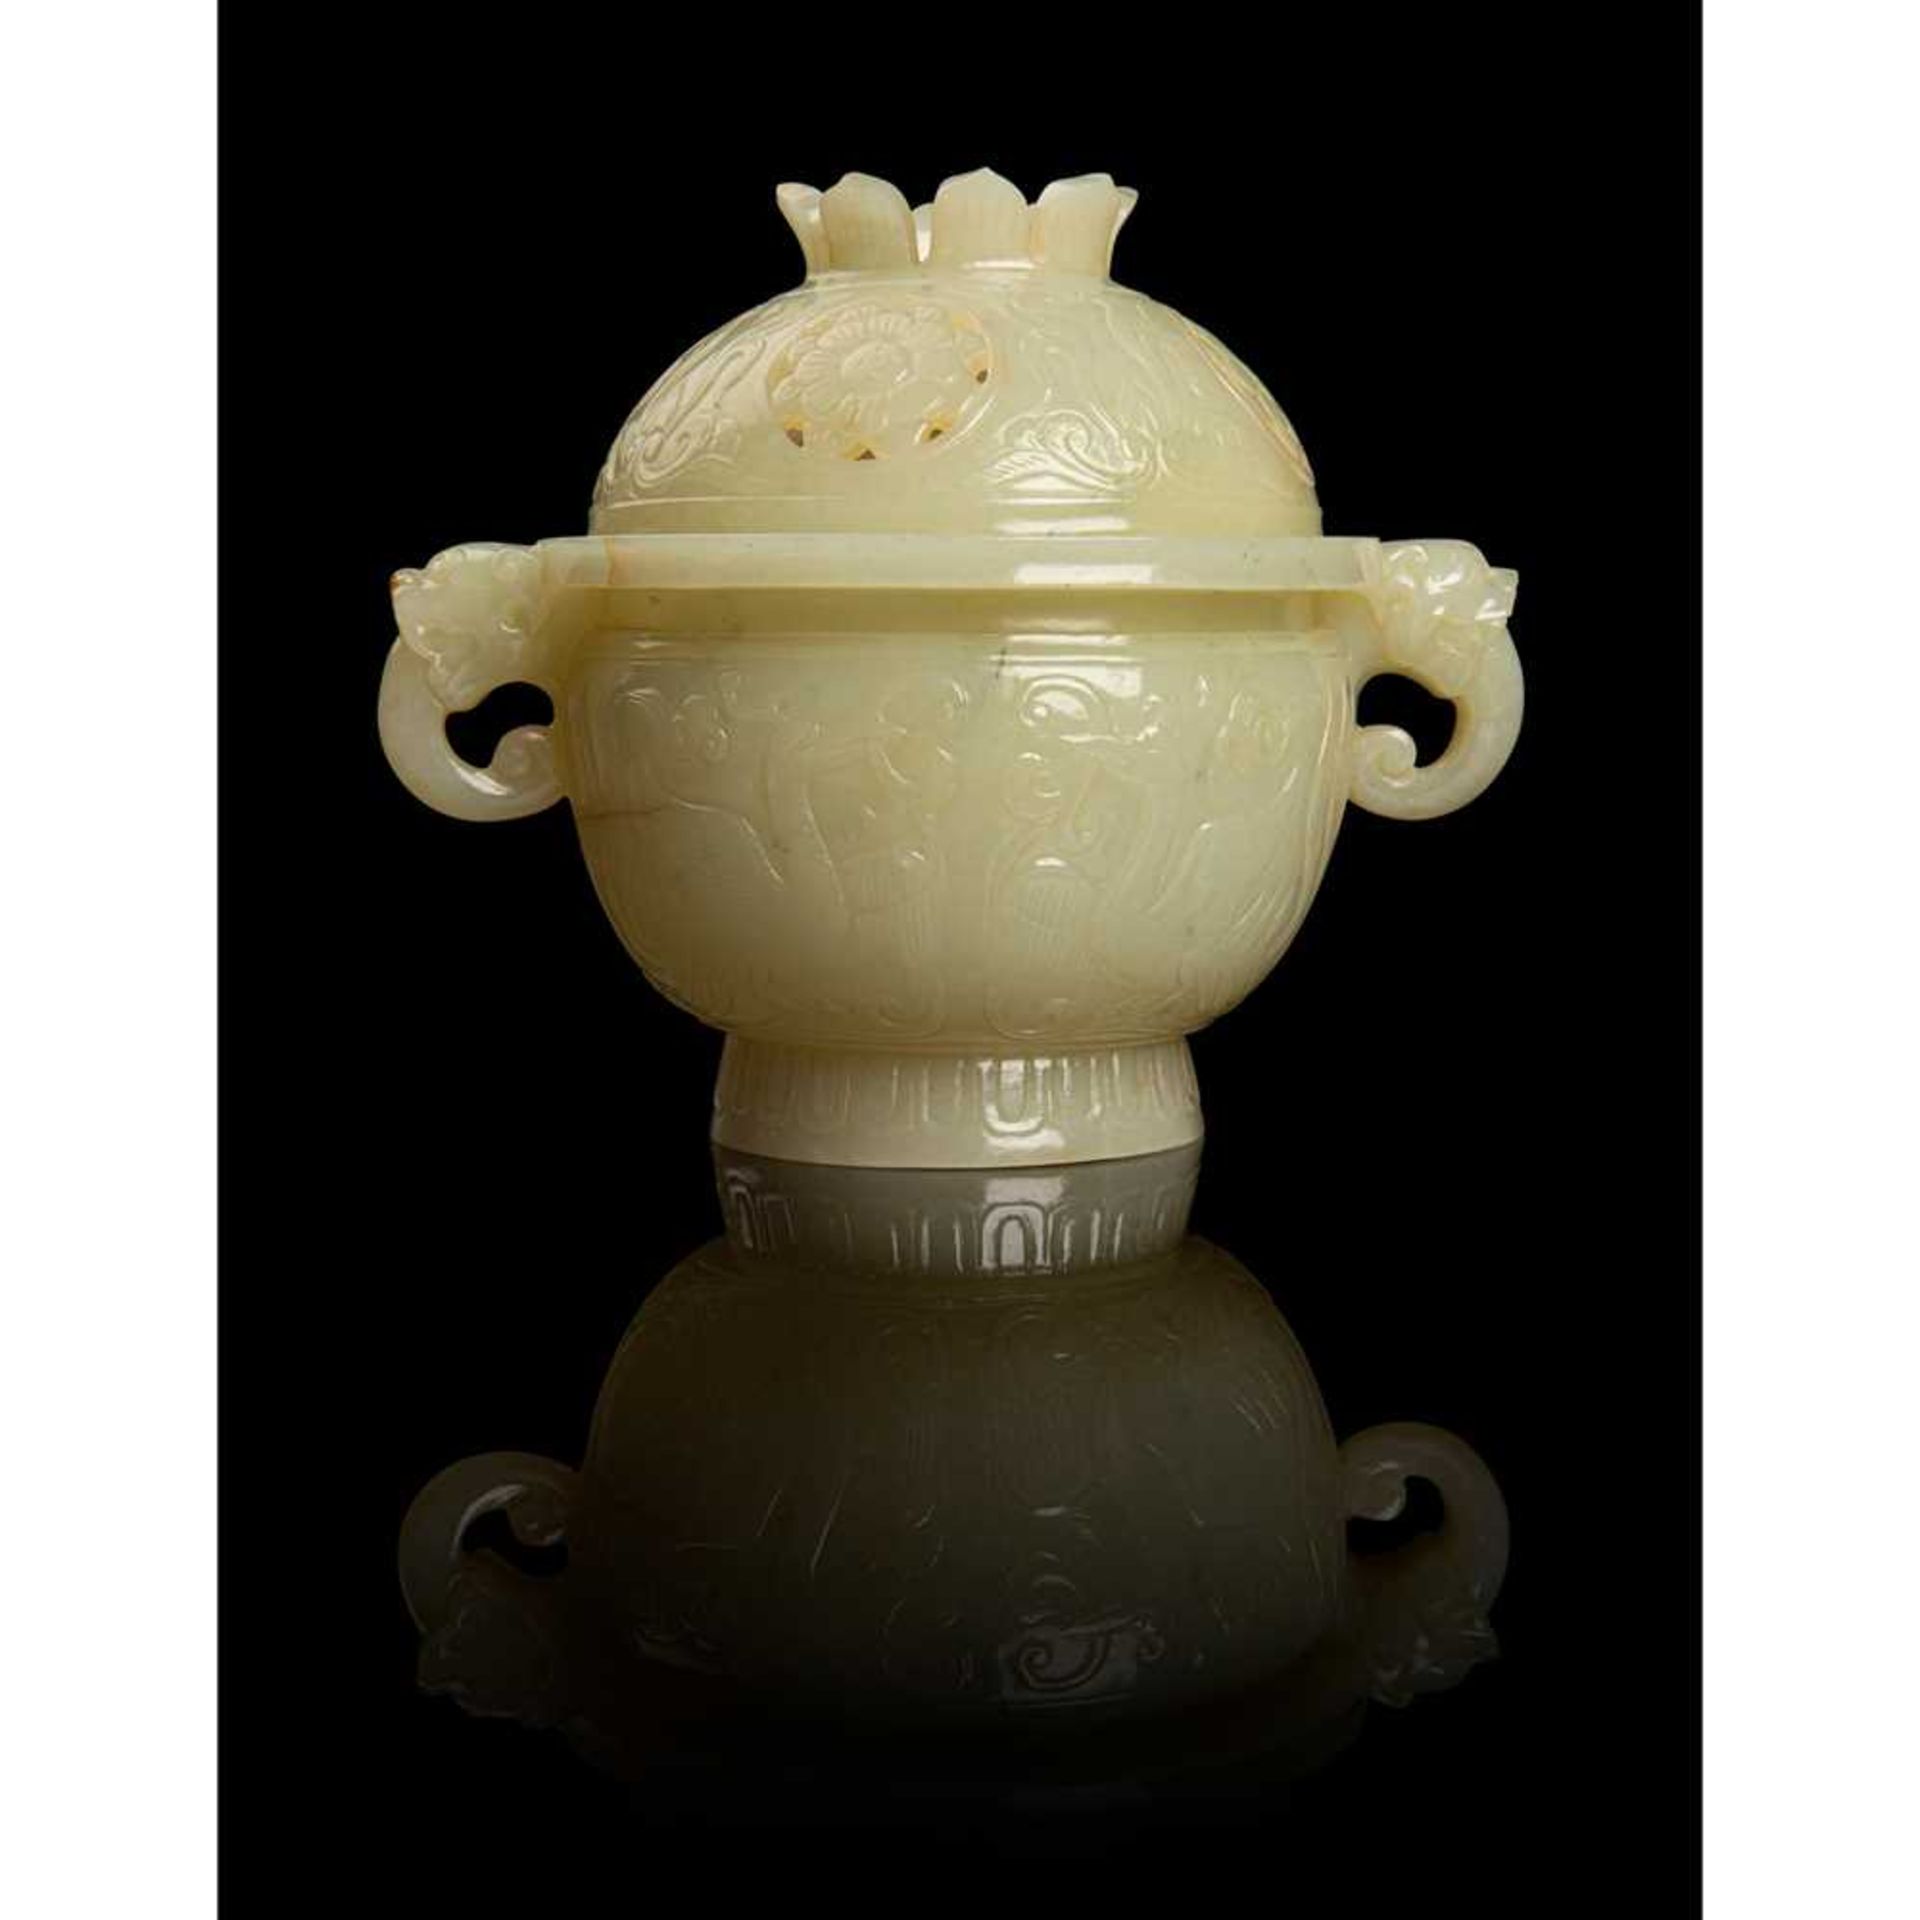 YELLOWISH PALE CELADON JADE CENSER WITH COVER QING DYNASTY, 19TH CENTURY